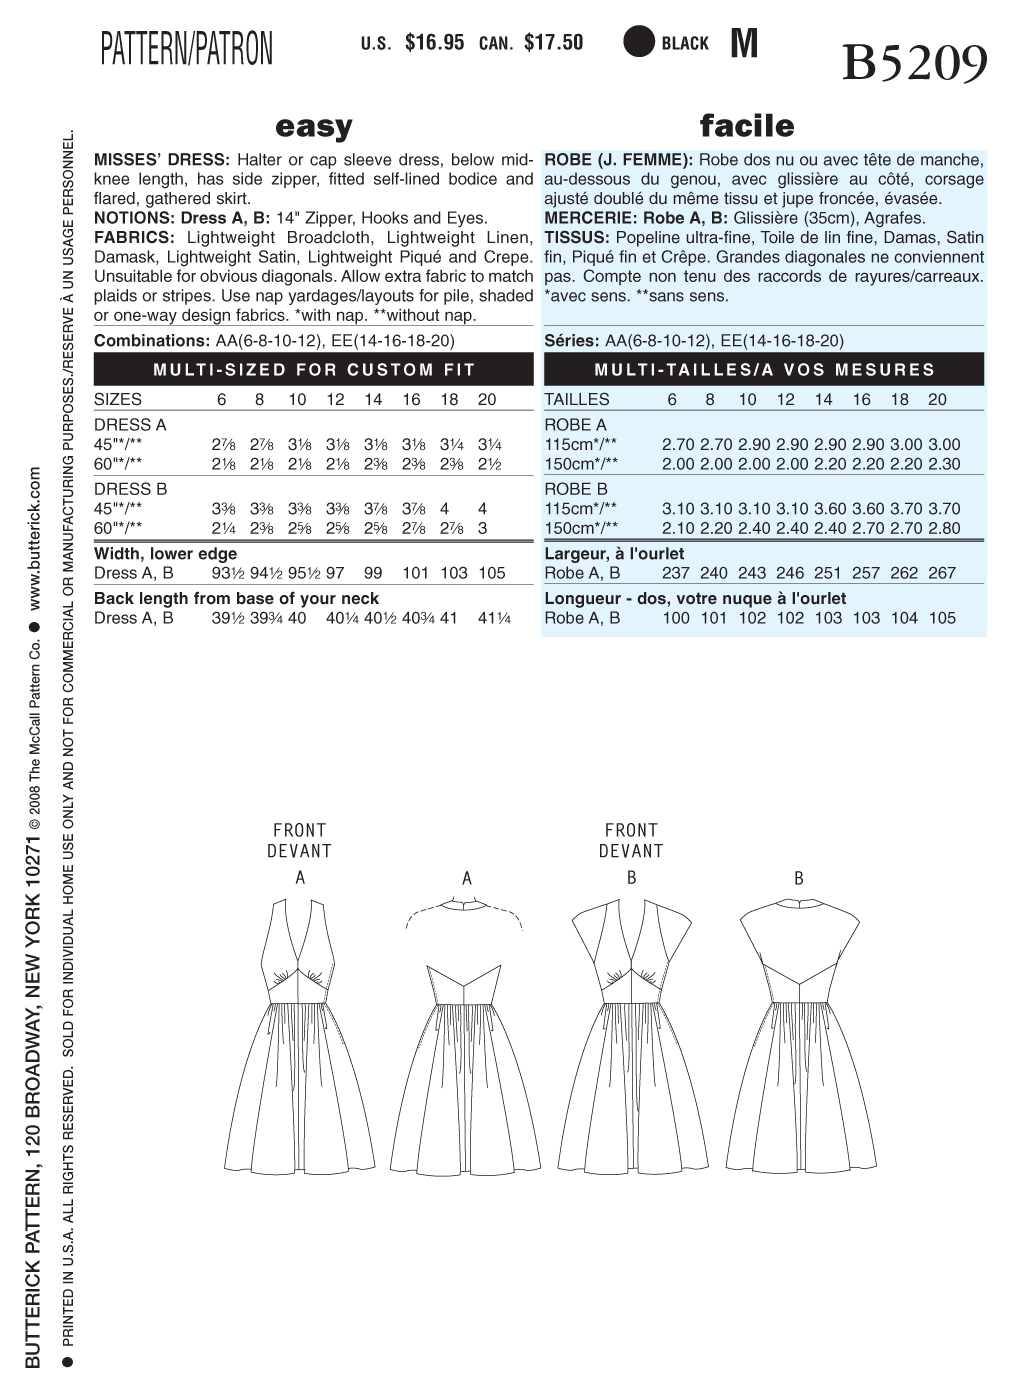 Butterick Sewing Patter B5209 Misses' Dress